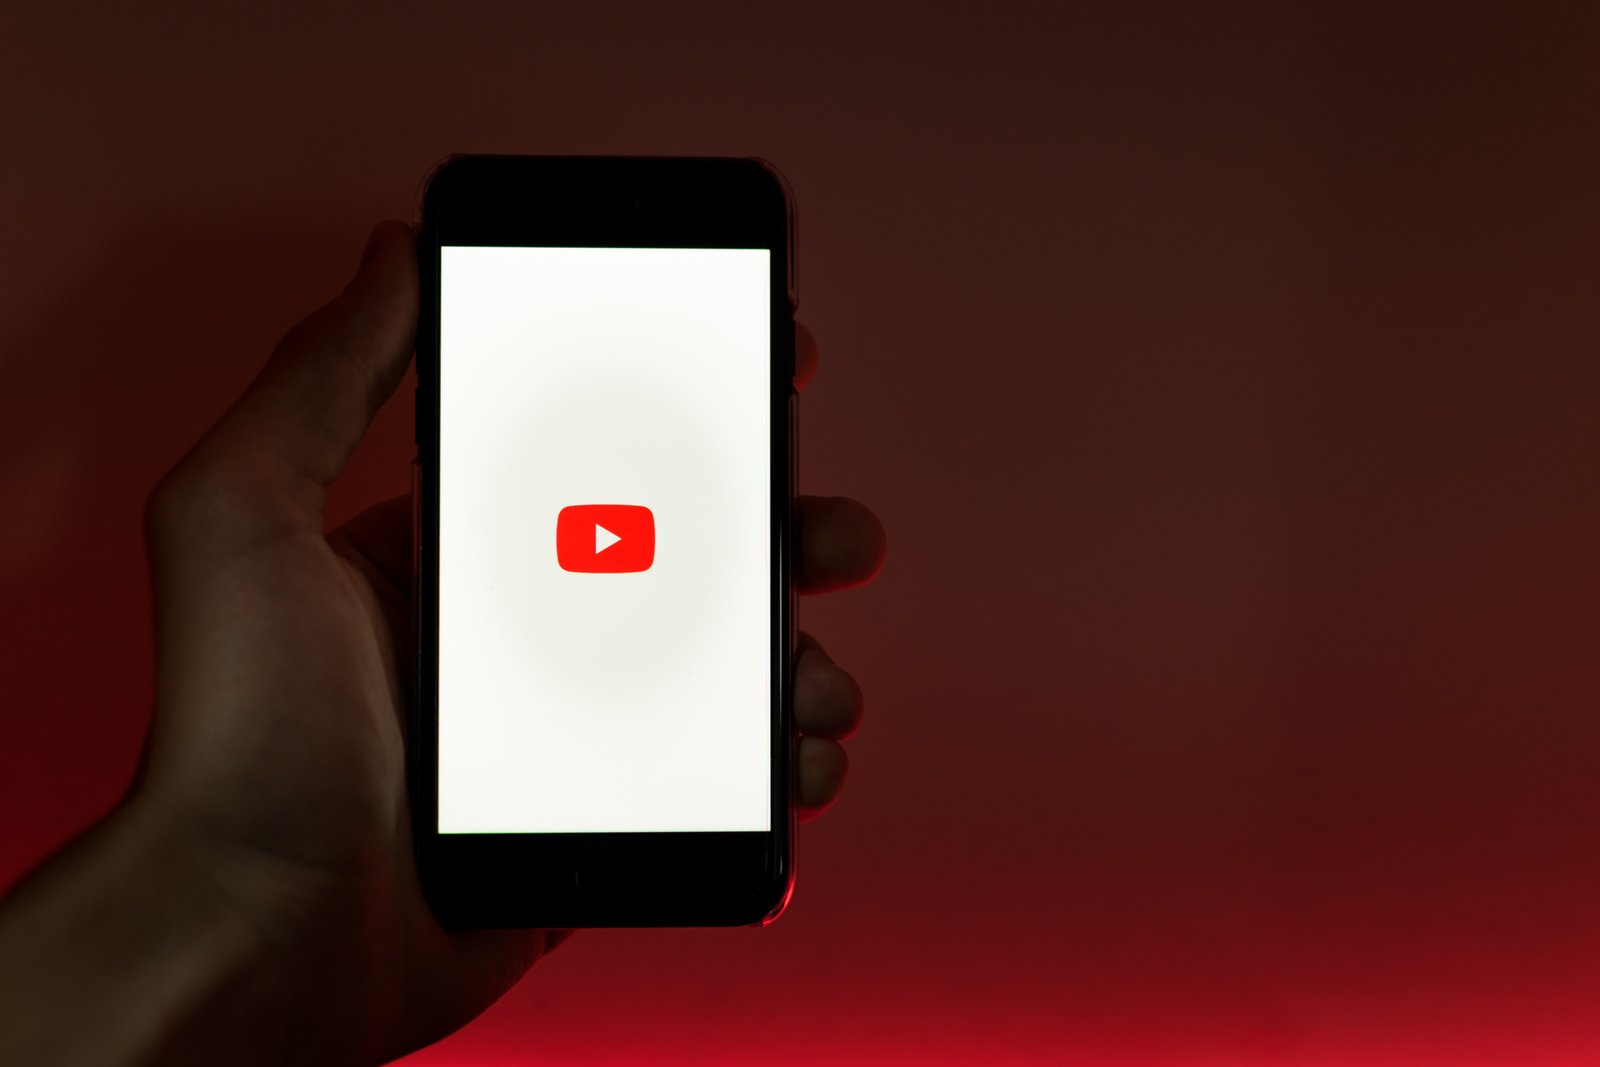 You may now zoom into videos on YouTube